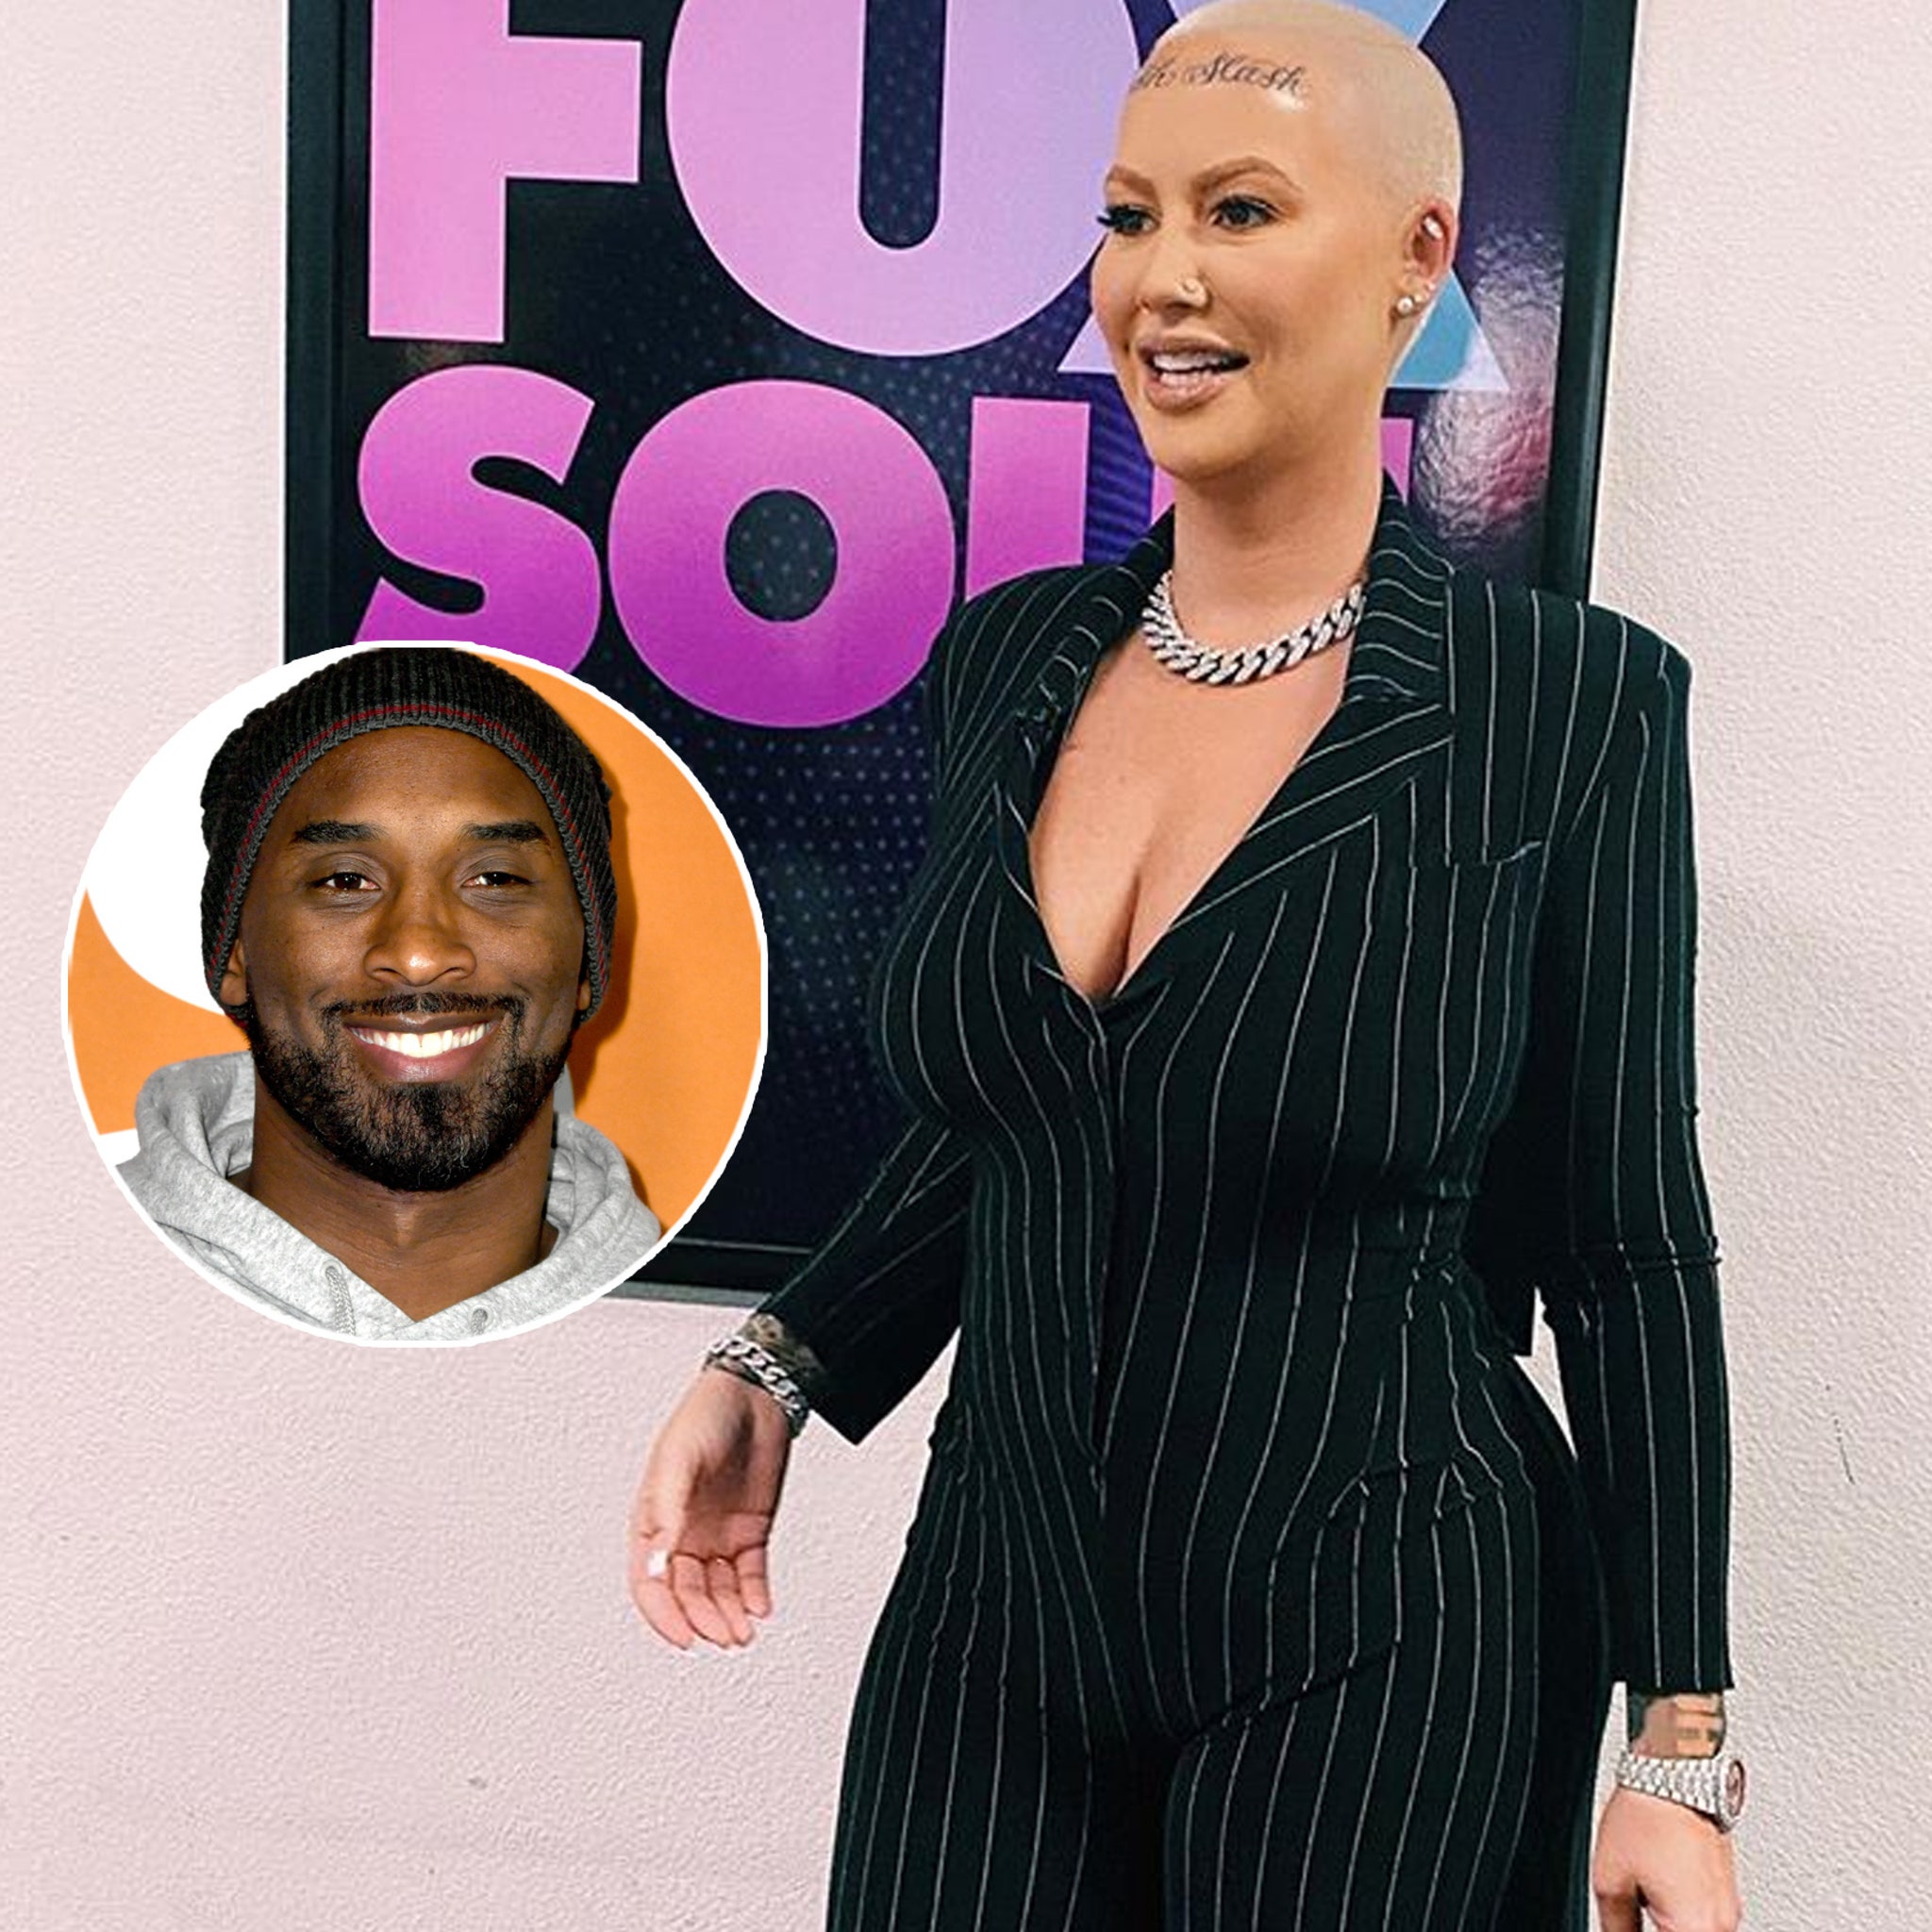 Amber Rose claims Kobes incident inspired her to get a face tattoo   DefenderNetworkcom